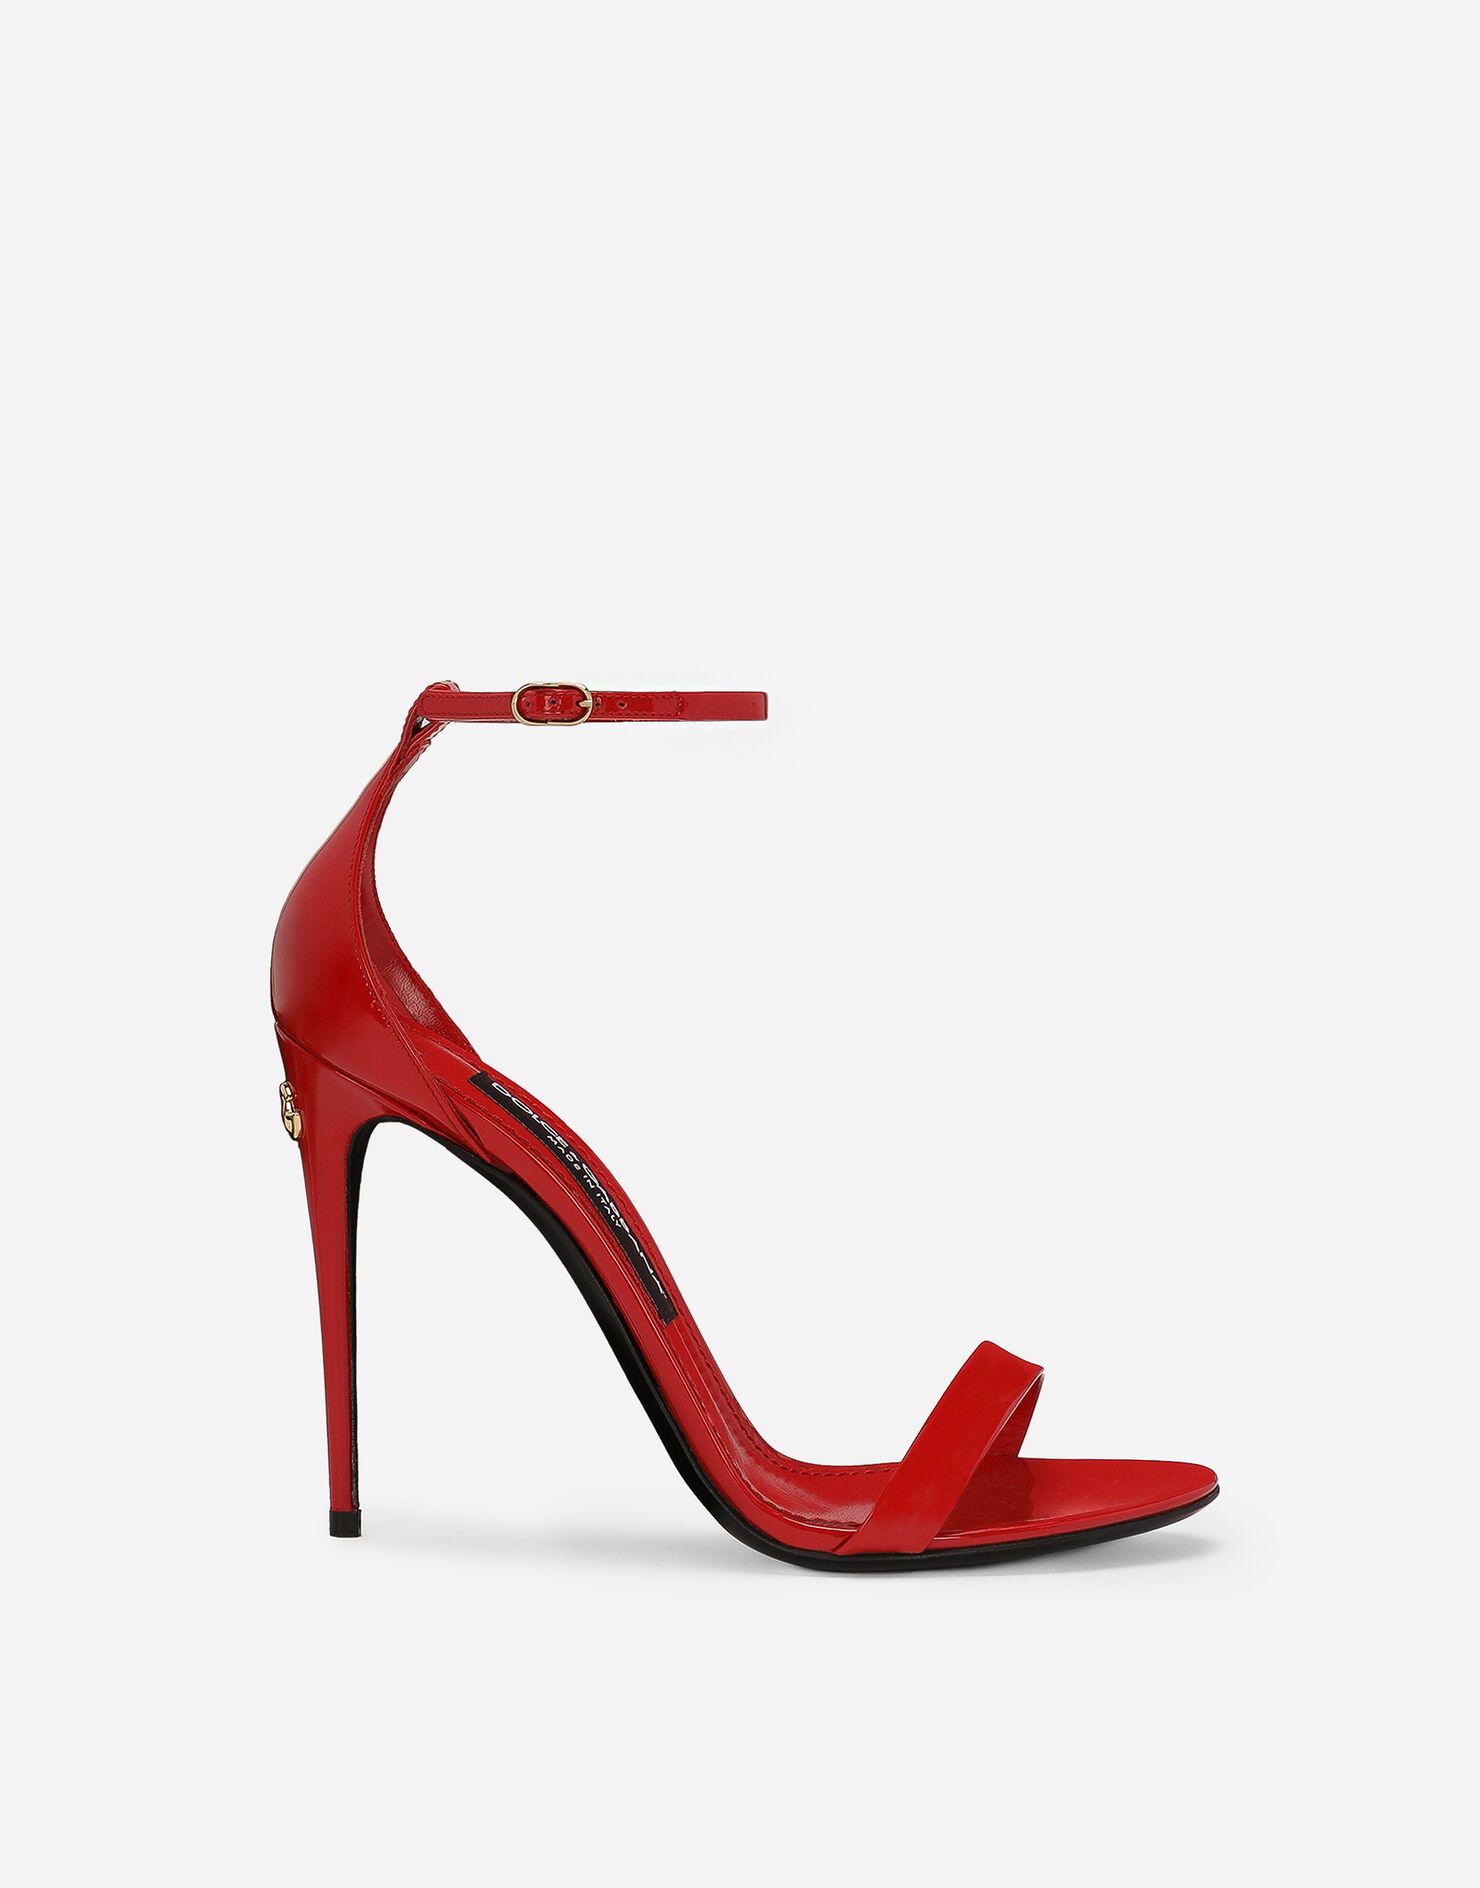 Patent leather sandals | Dolce & Gabbana - INT